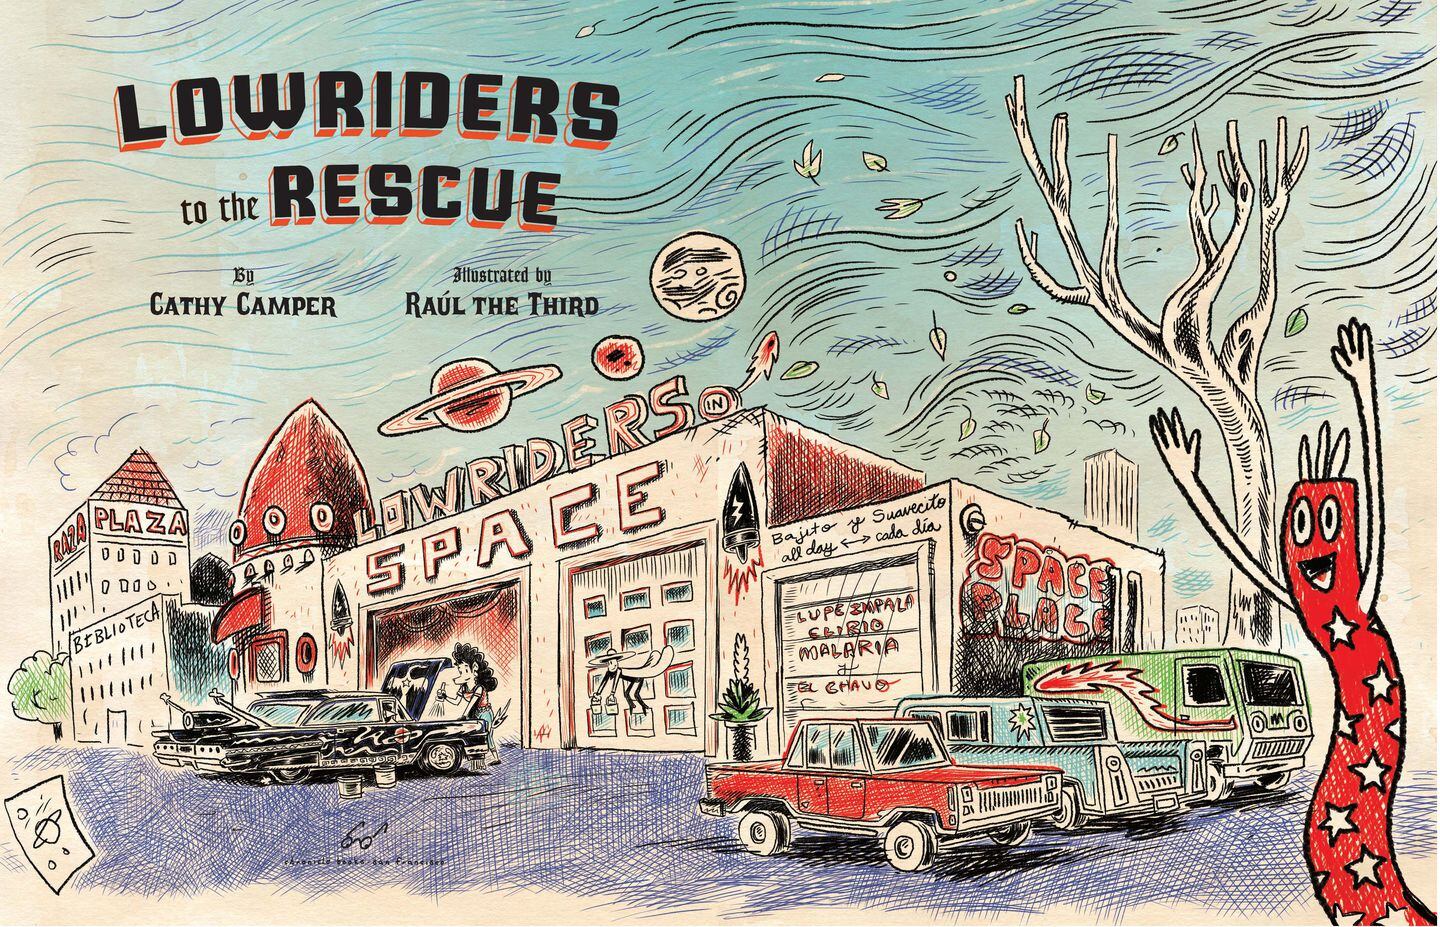 New book in 'Lowriders' series for kids focuses on climate change